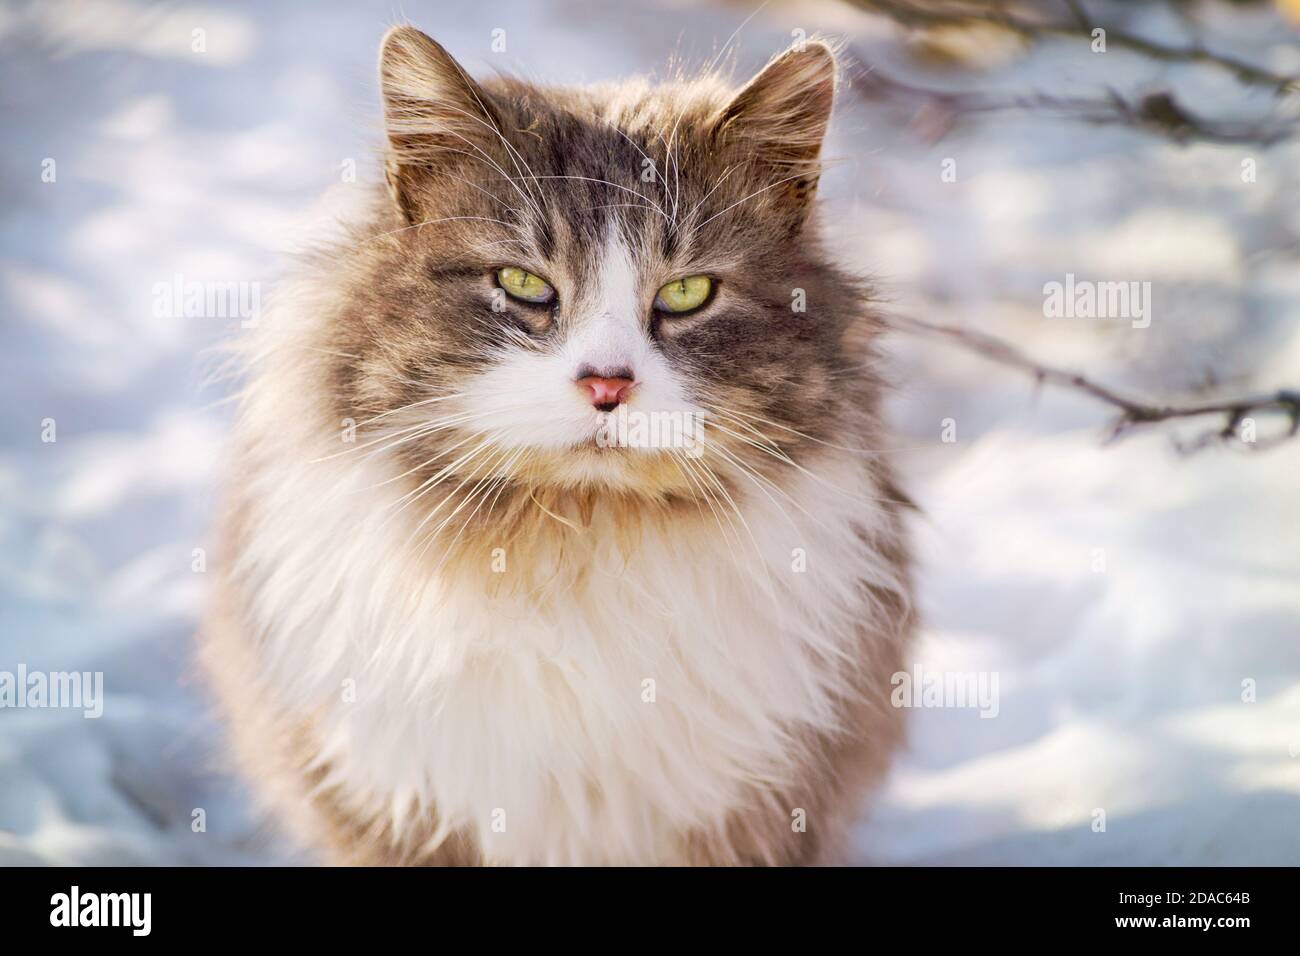 animal, brown, cat, dirty, feline, fluffy, furry, green eyes, homeless, kitty, march, outdoor, pet, portrait, snow, spring, tabby, white, winter Stock Photo